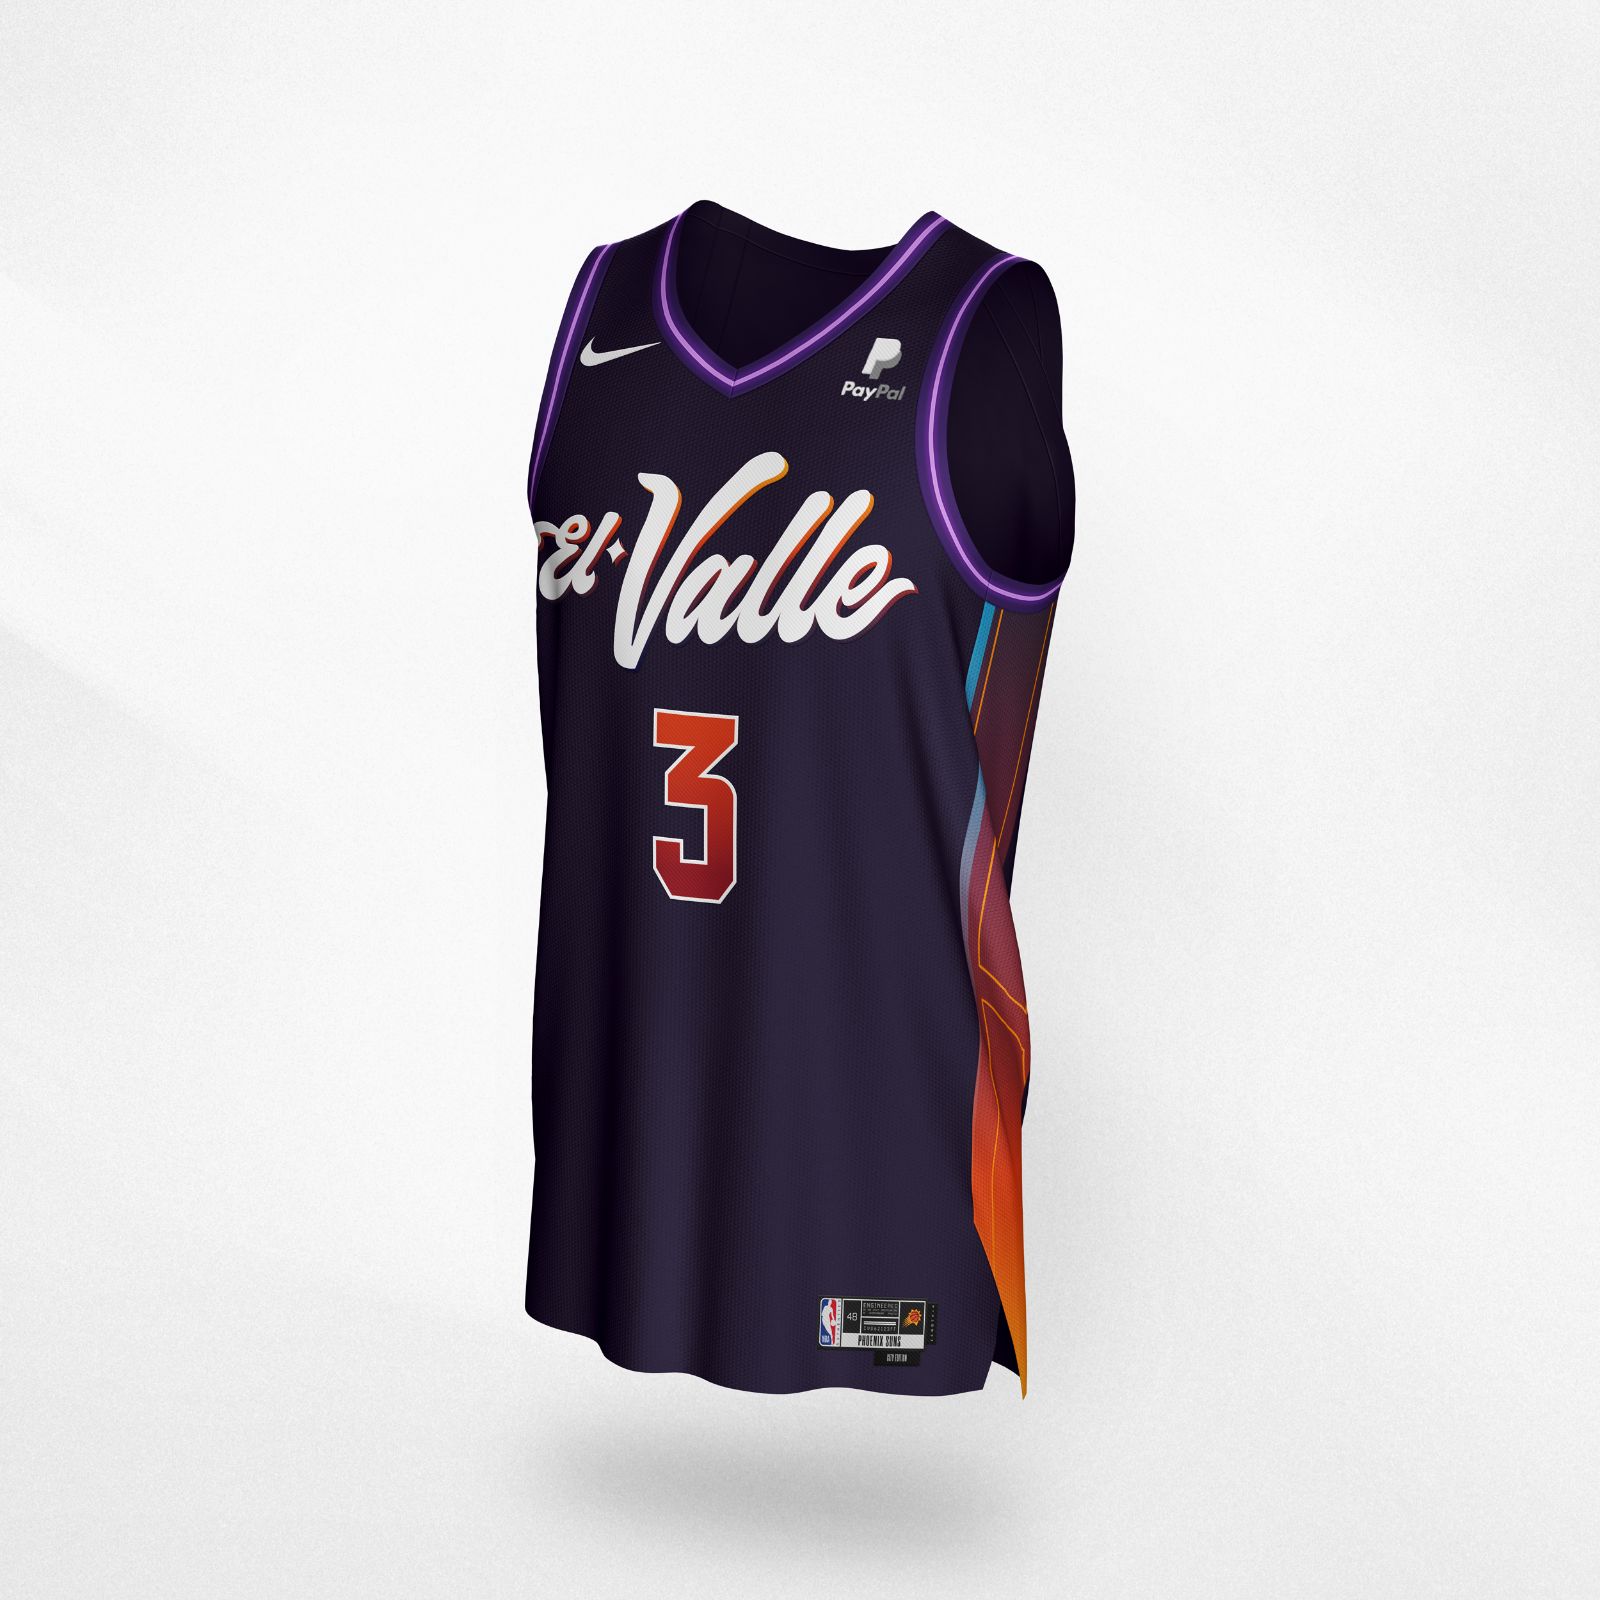 Suns “Earned” jersey not sure if these are real because these jerseys are  for playoff teams last season, but it was leaked along with the other  playoff teams. : r/suns